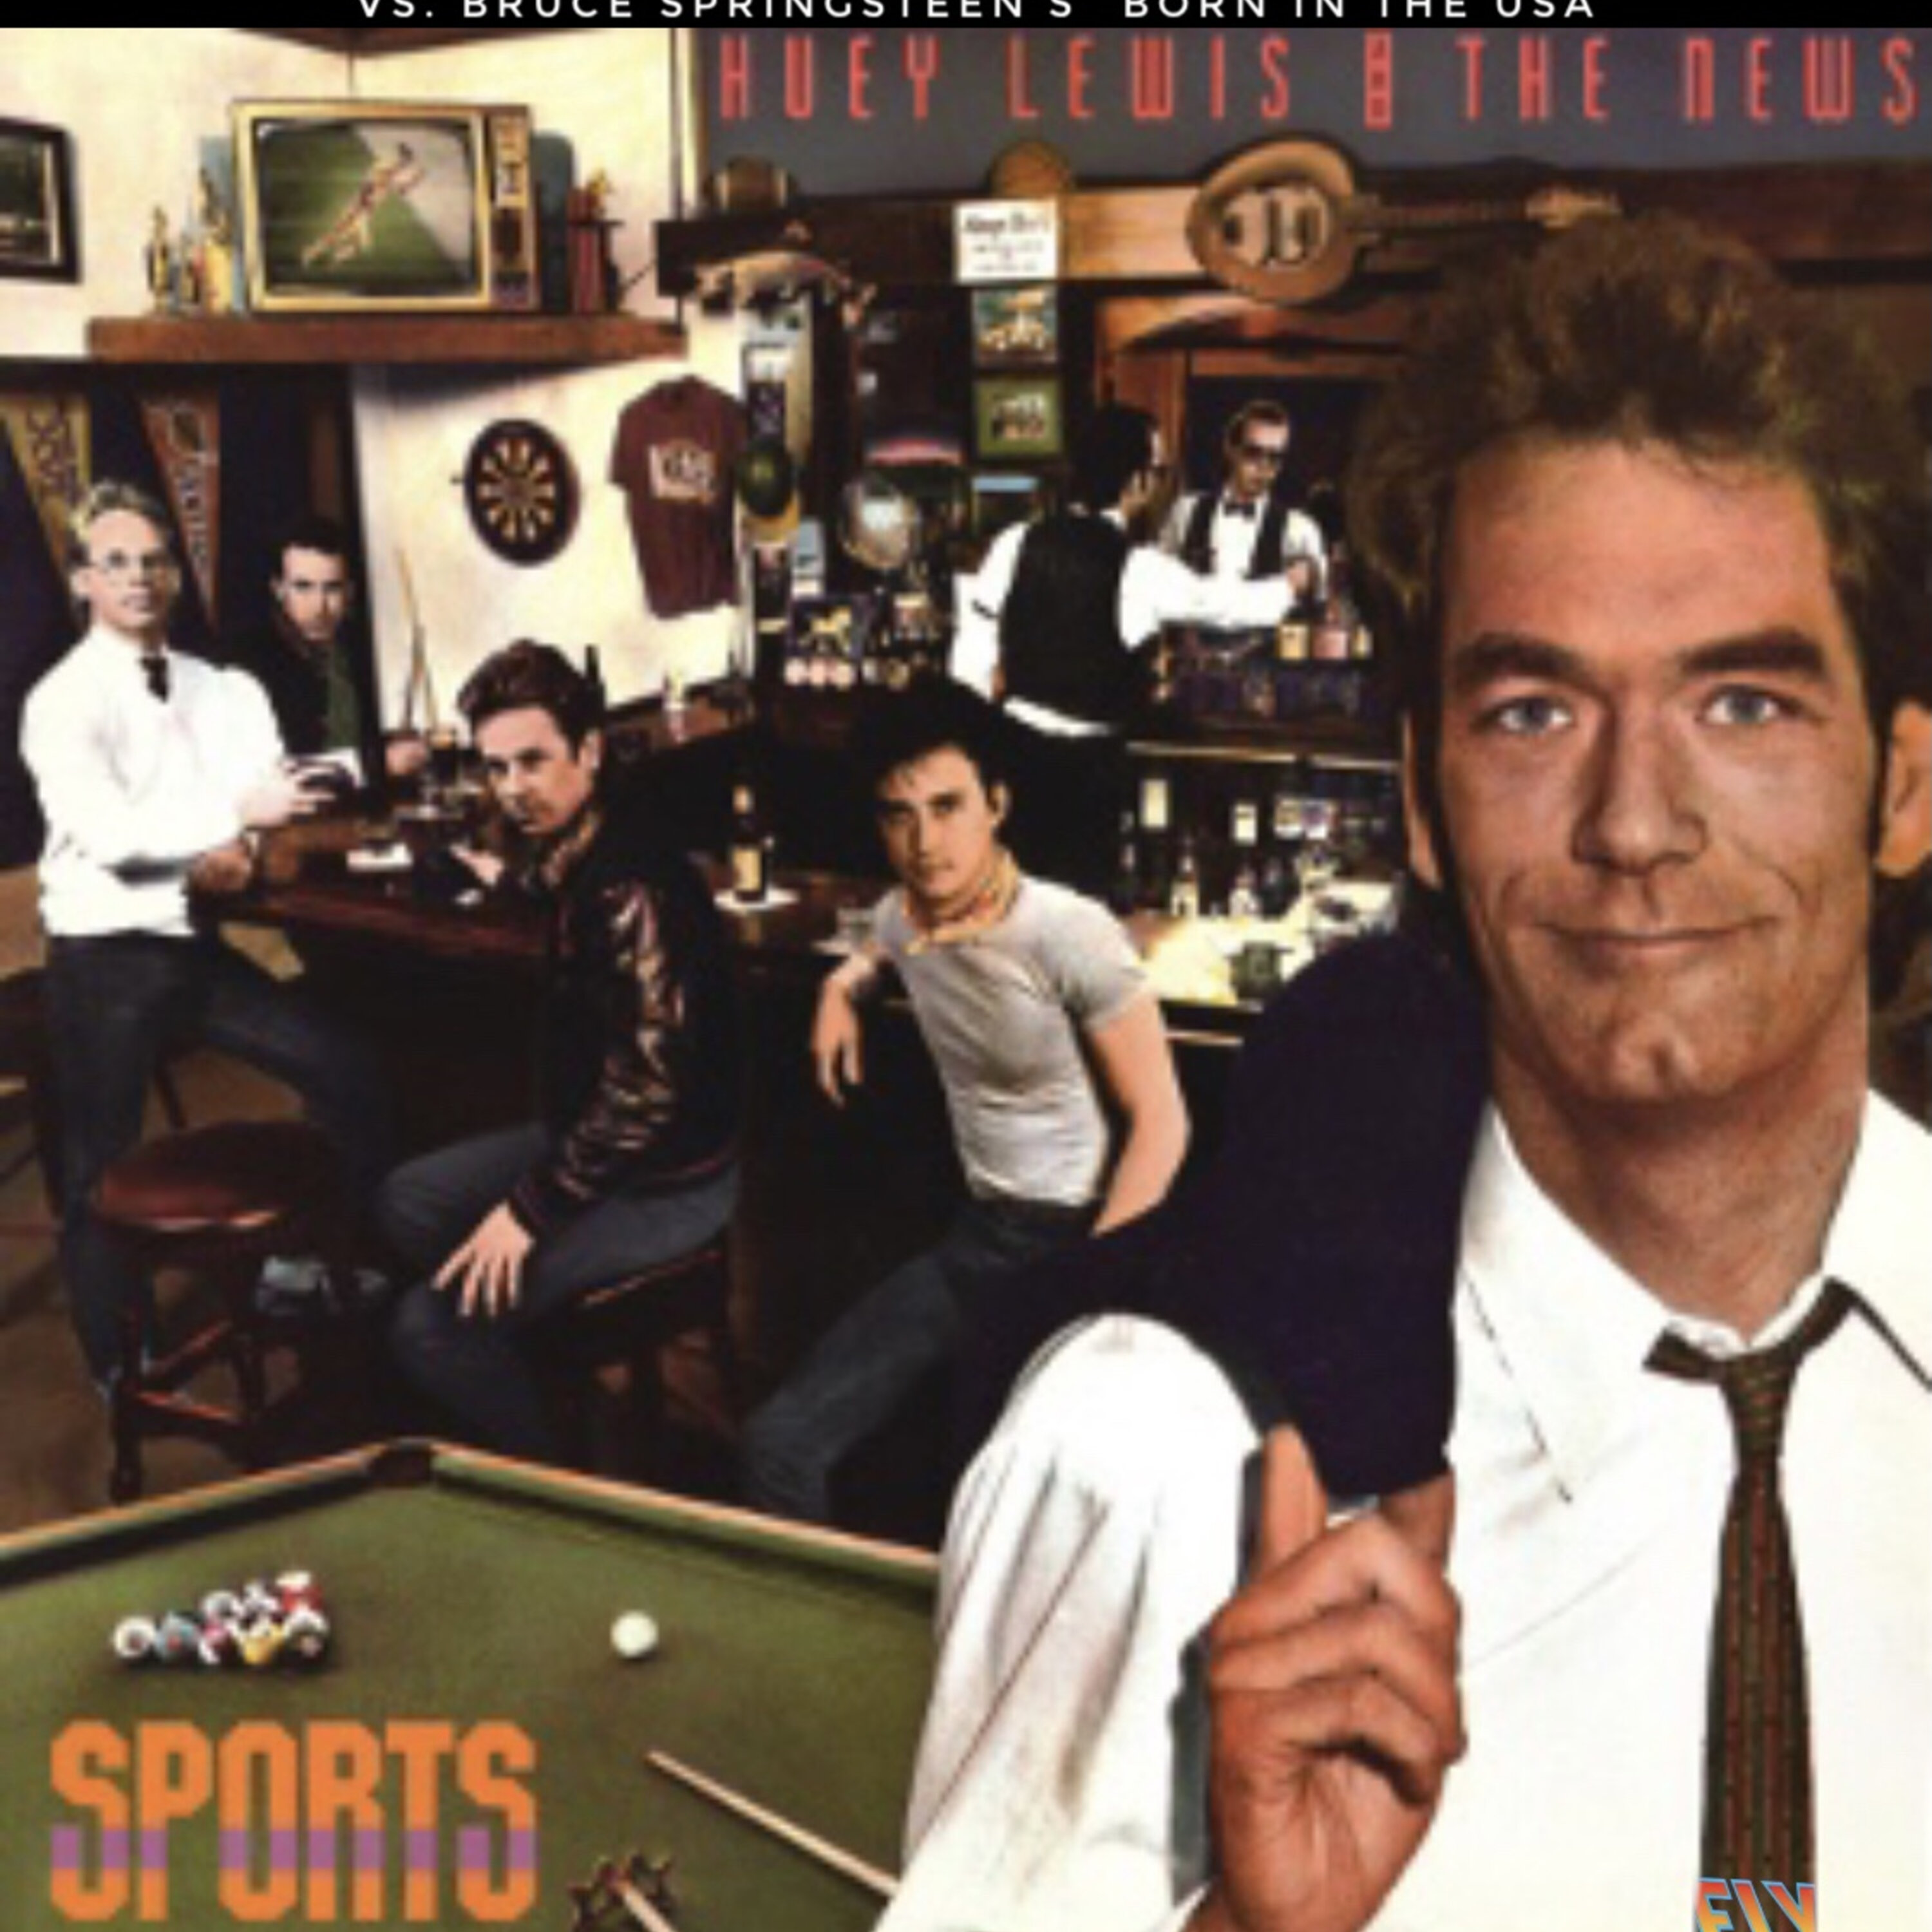 Huey Lewis and the News "Sports" vs. Bruce Springsteen's "Born in the USA"